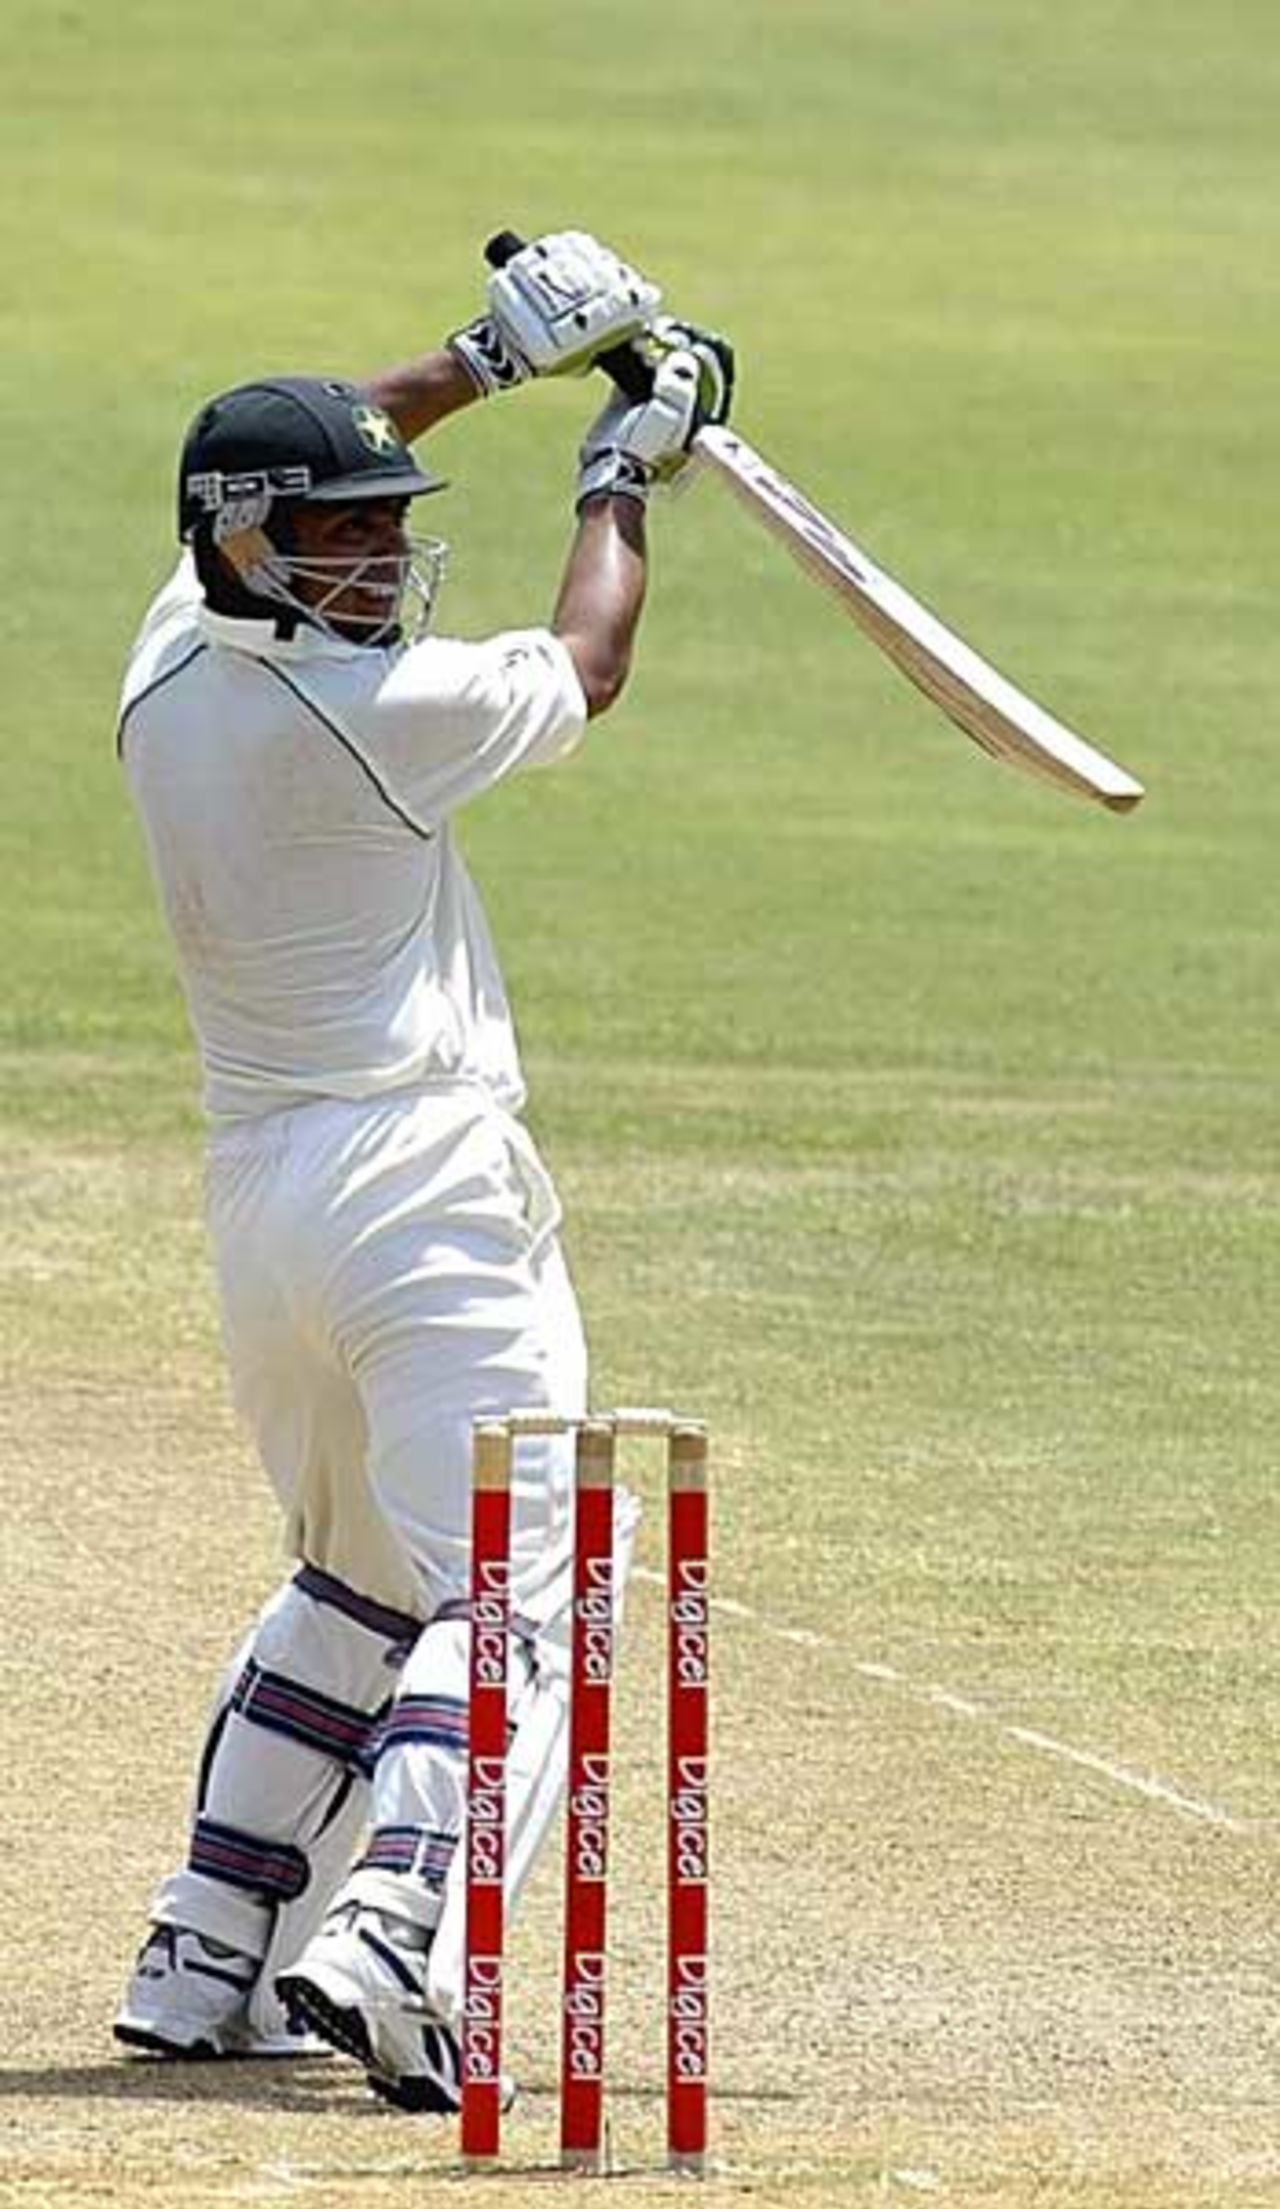 Kamran Akmal guides the ball away during his 49, West Indies v Pakistan, 2nd Test, Jamaica, June 4